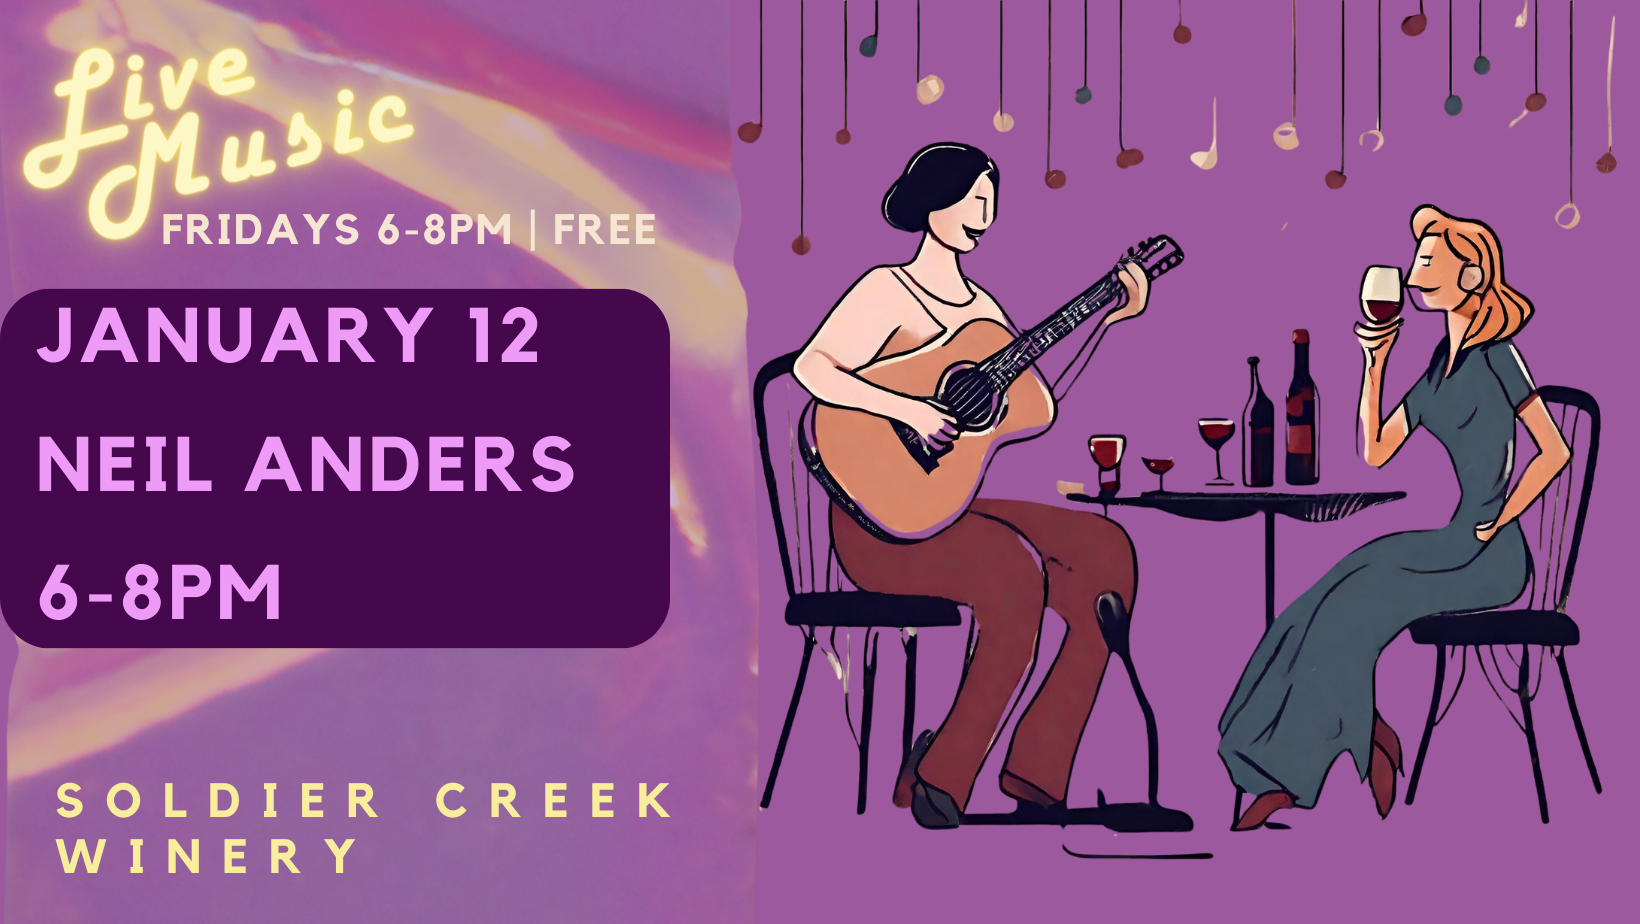 free, live music every friday at soldier creek winery. january 12 is neil anders from 6-8pm. free to listen.